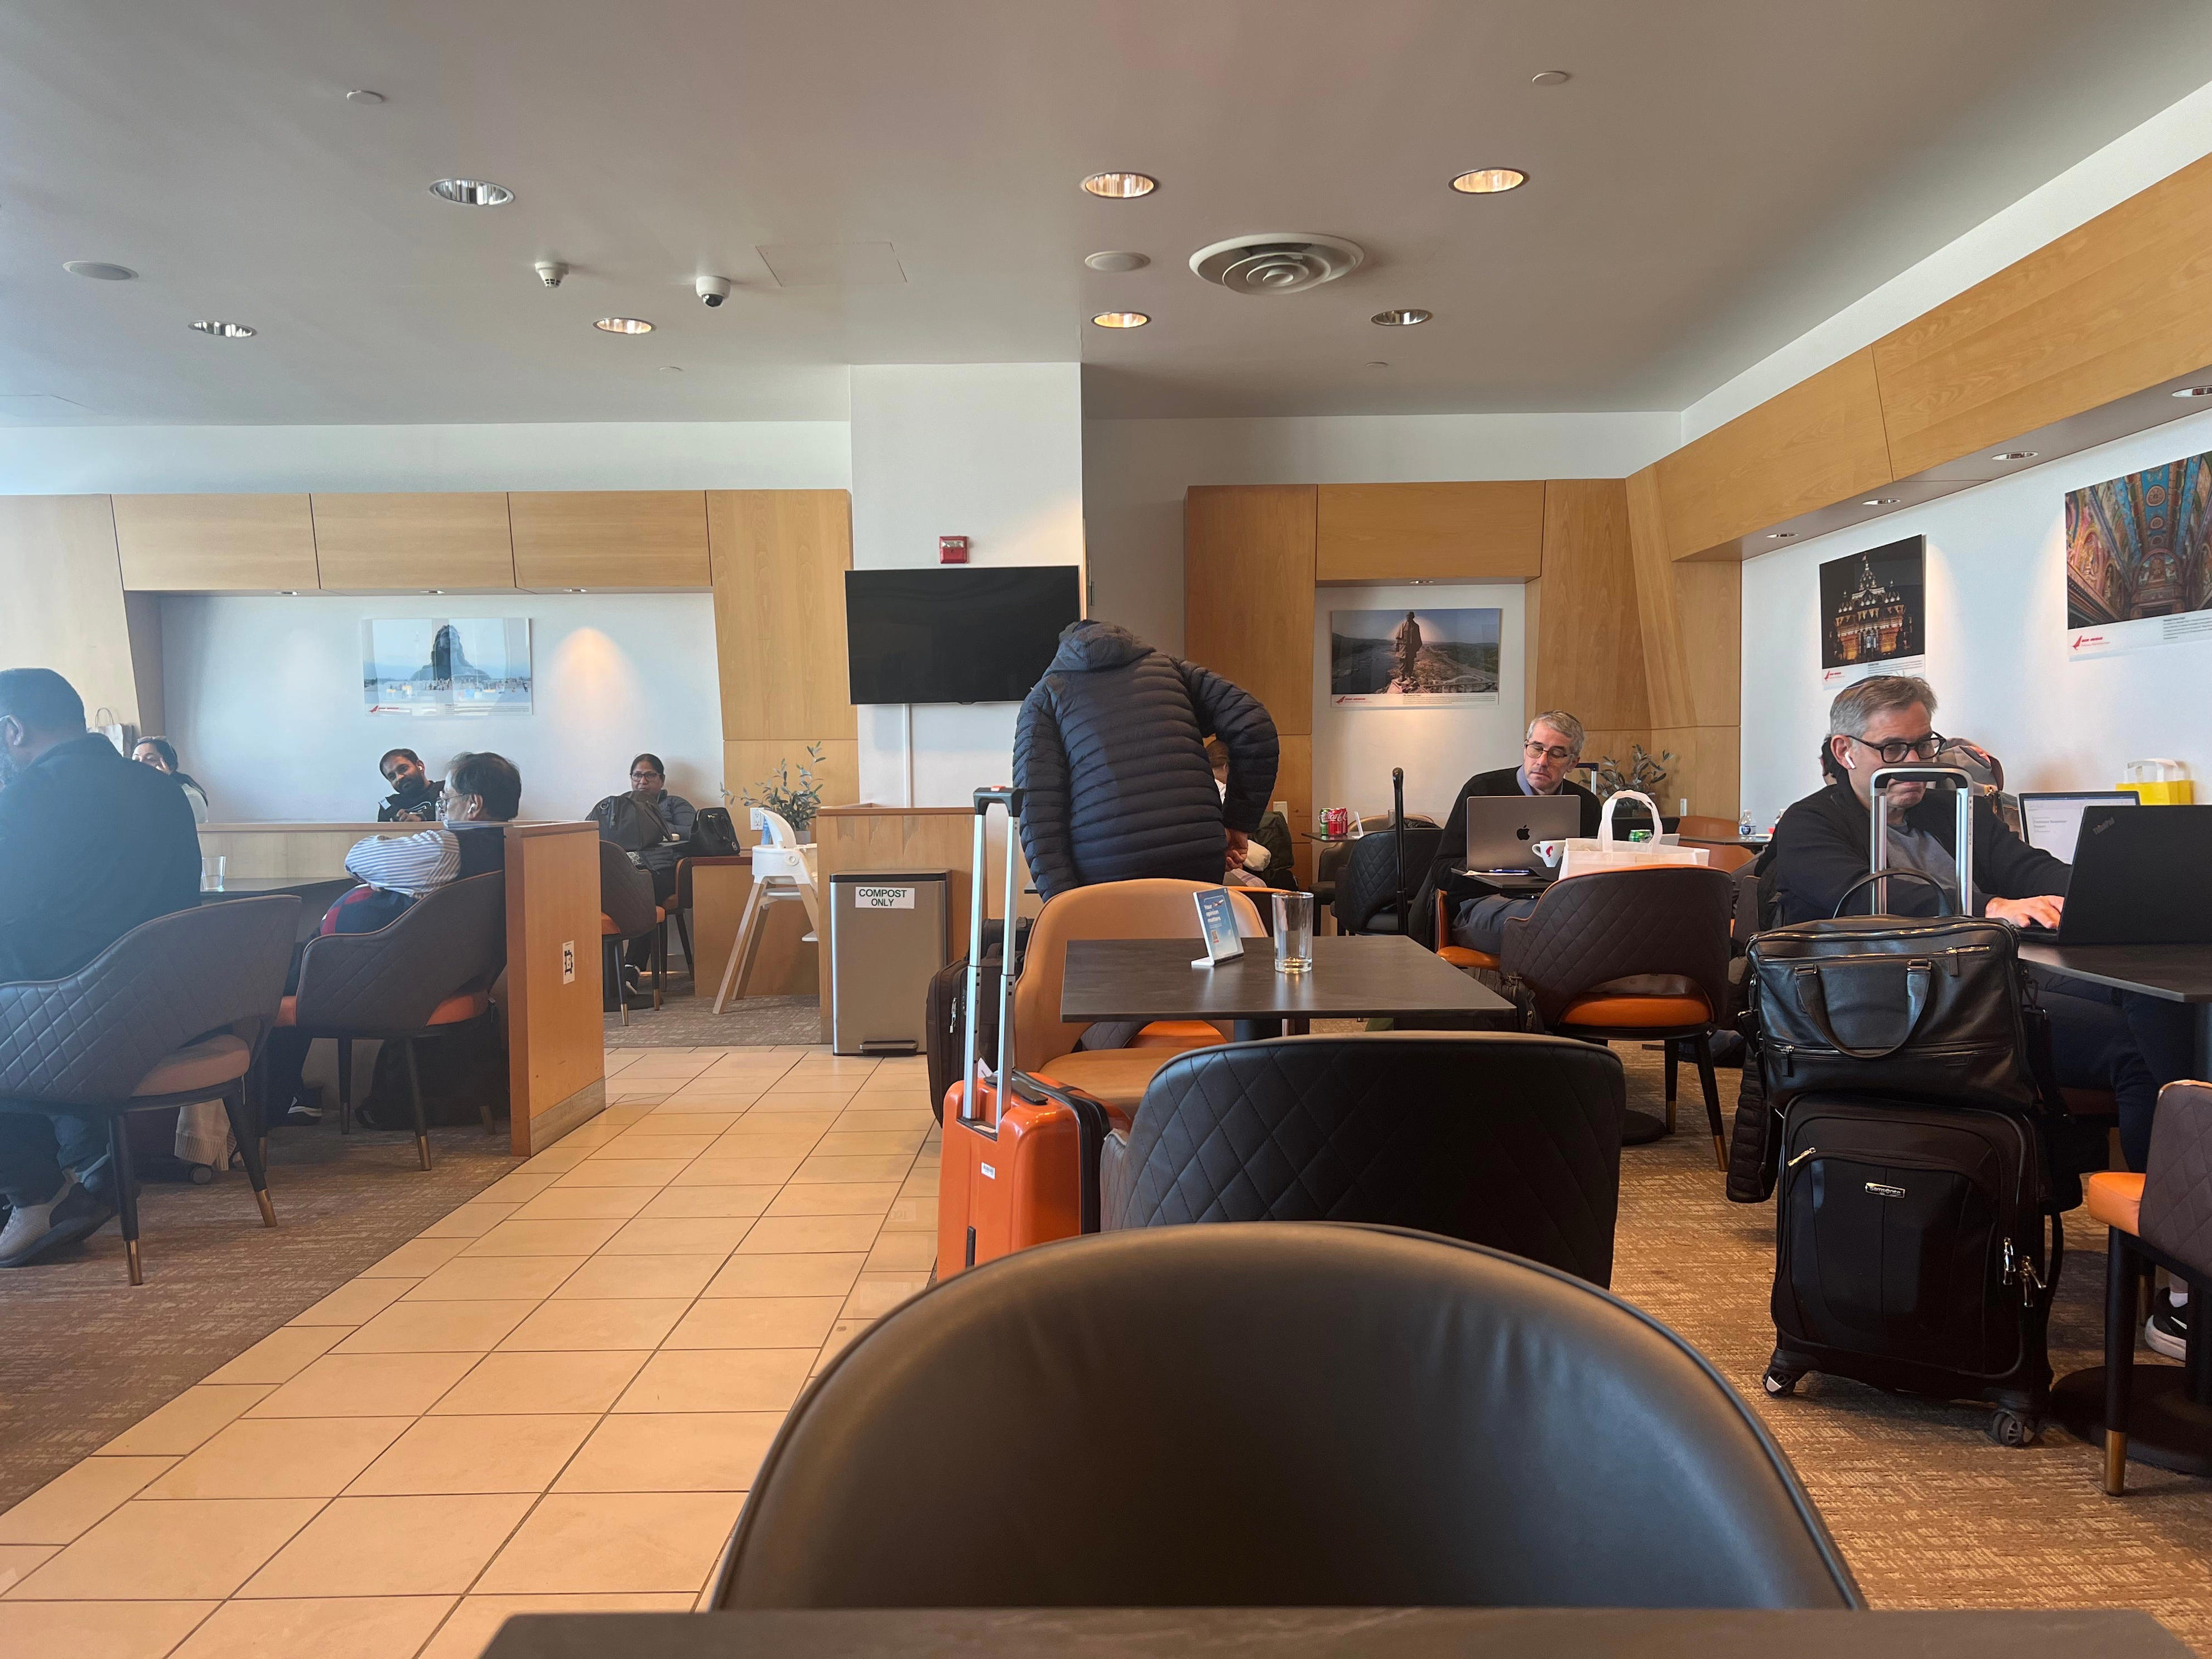 <p>The current Air India lounge offers free food and drinks (alcohol included) but is small and crowded.</p><p>However, Air India is <a href="https://timesofindia.indiatimes.com/business/india-business/air-india-to-have-signature-lounges-delhi-t3-new-york-jfk-t4-hires-hba-for-renovating-existing-ones/articleshow/105728723.cms?from=mdr">refreshing</a> its New York-JFK lounge as part of its aim to become a more elite carrier.</p>